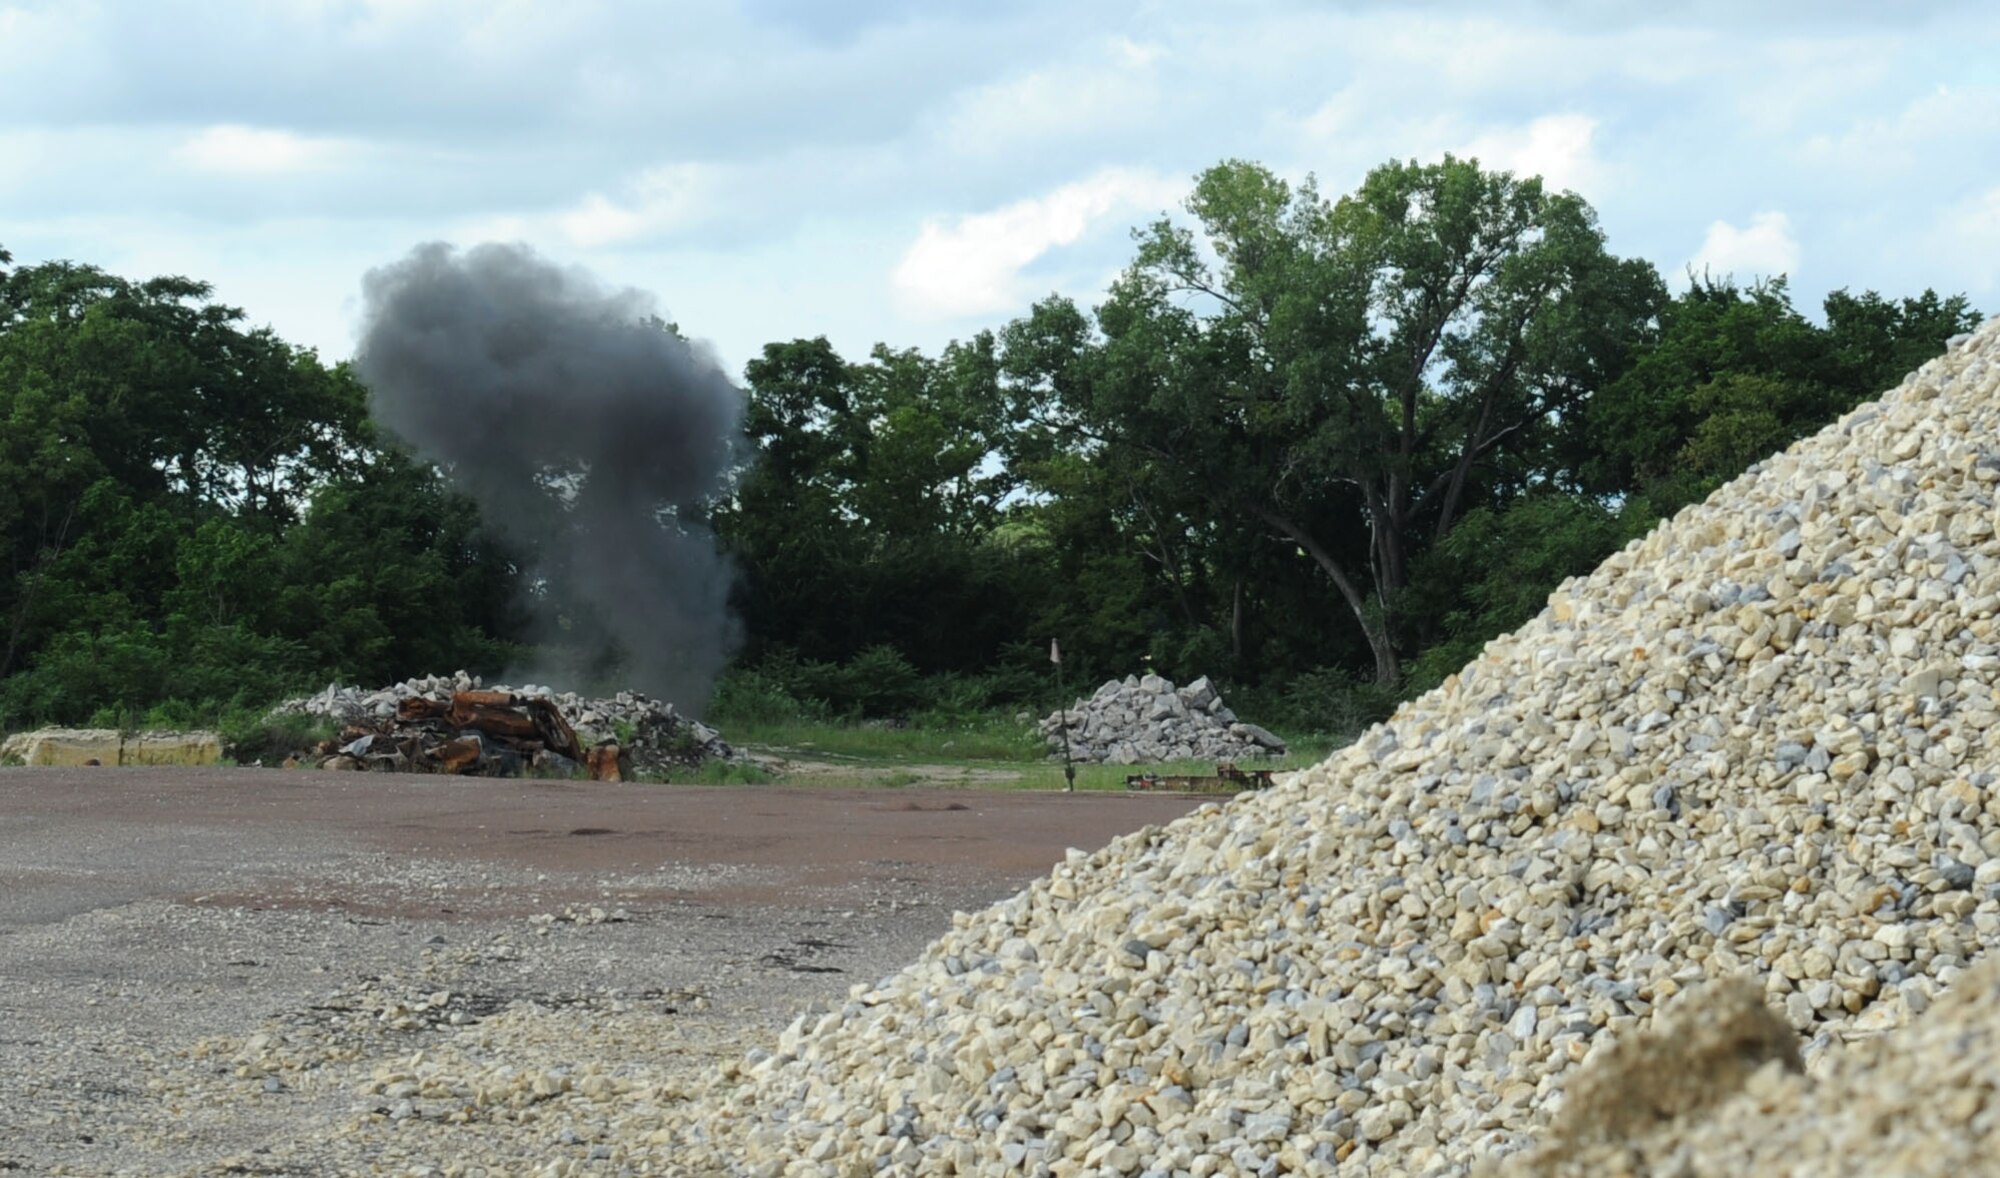 A plume of smoke rises into the air after 22nd Civil Engineer Squadron explosive ordnance disposal technicians detonate munitions in order to dispose of an artillery projectile Aug. 8, 2016, in Marion County, Kan. The Marion County Sherriff’s department contacted McConnell’s EOD team after an individual turned in a potentially dangerous explosive device. (U.S. Air Force photo/ Senior Airman Tara Fadenrecht)